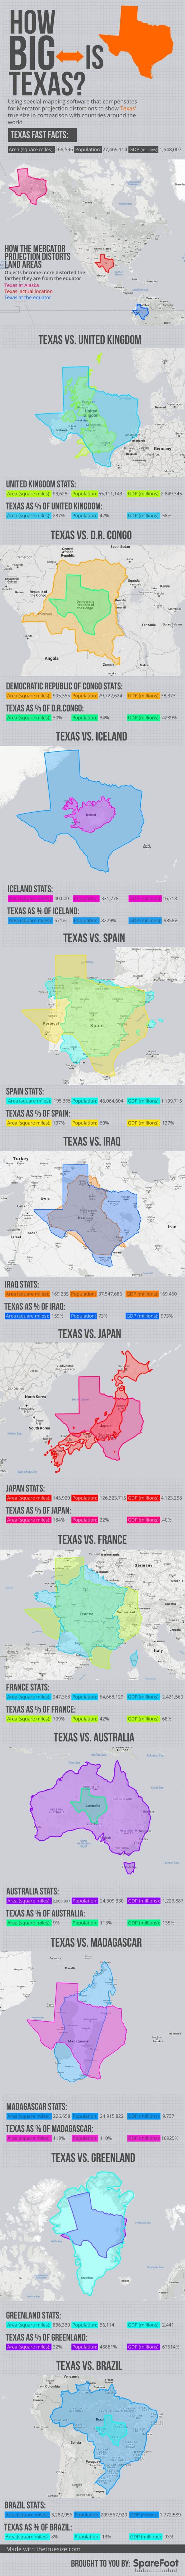 Texas is a large area